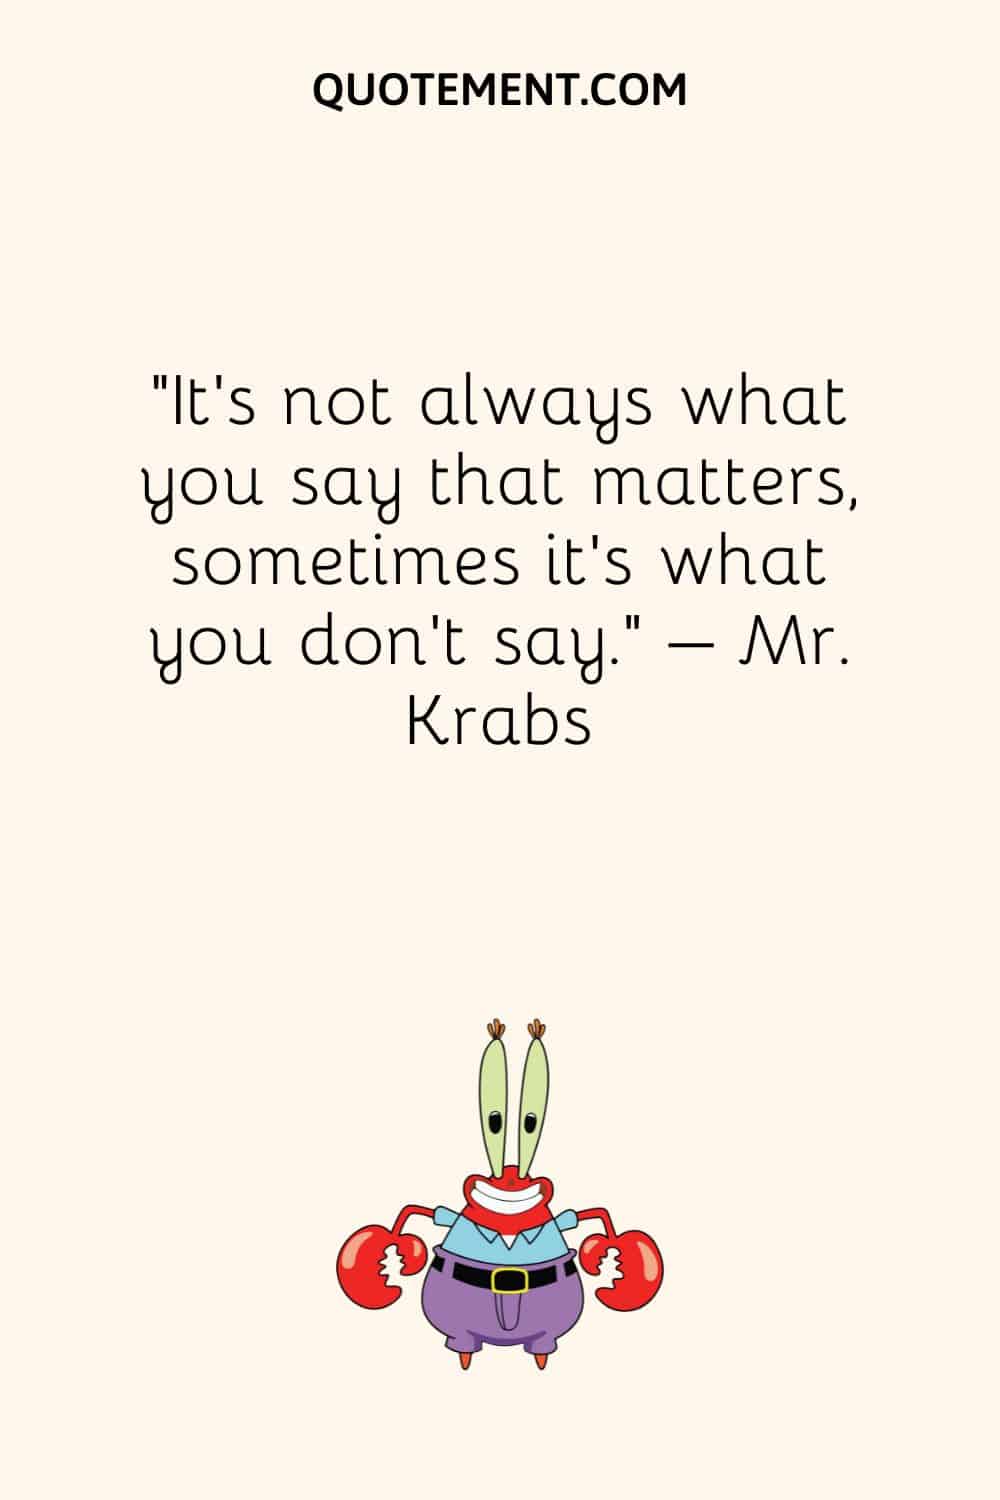 “It’s not always what you say that matters, sometimes it’s what you don’t say.” – Mr. Krabs